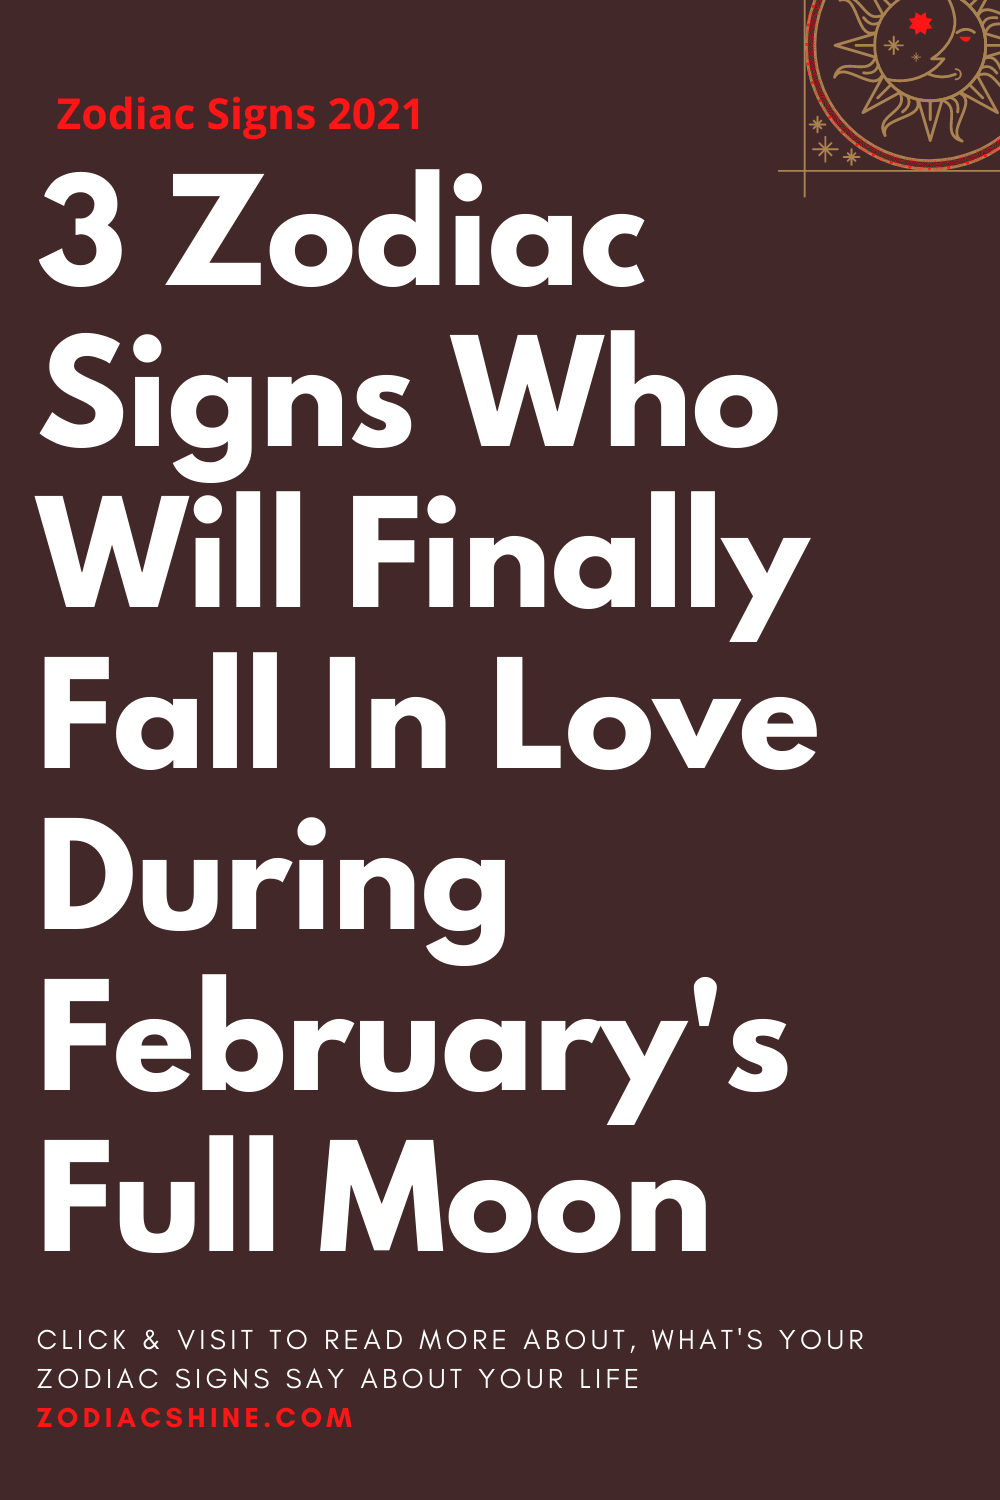 3 Zodiac Signs Who Will Finally Fall In Love During February's Full Moon